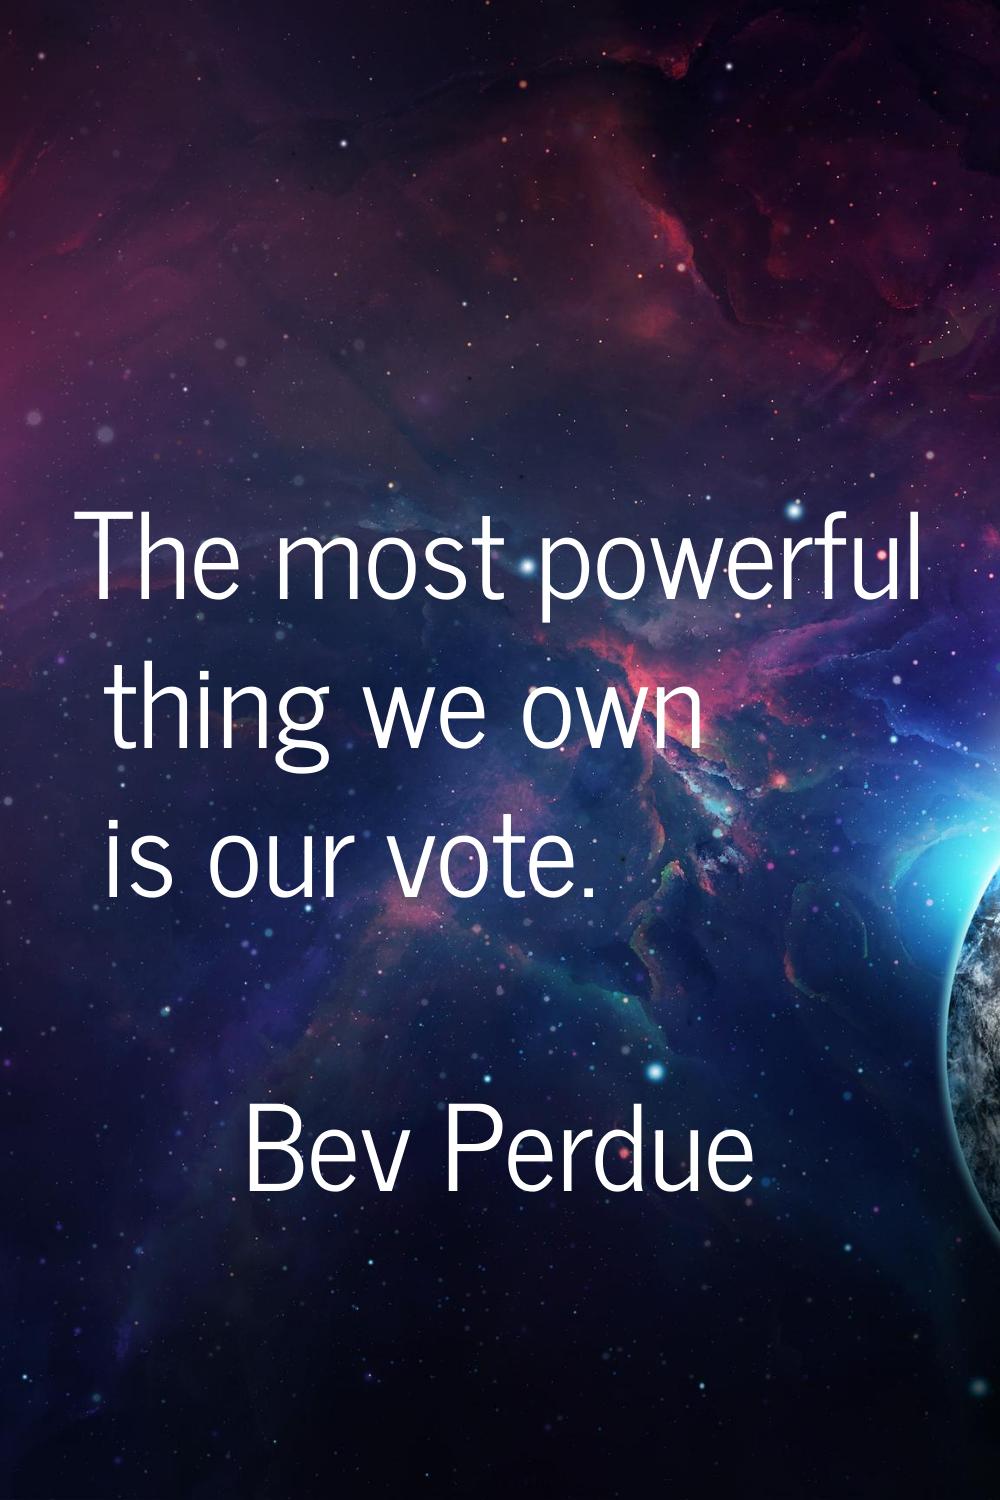 The most powerful thing we own is our vote.